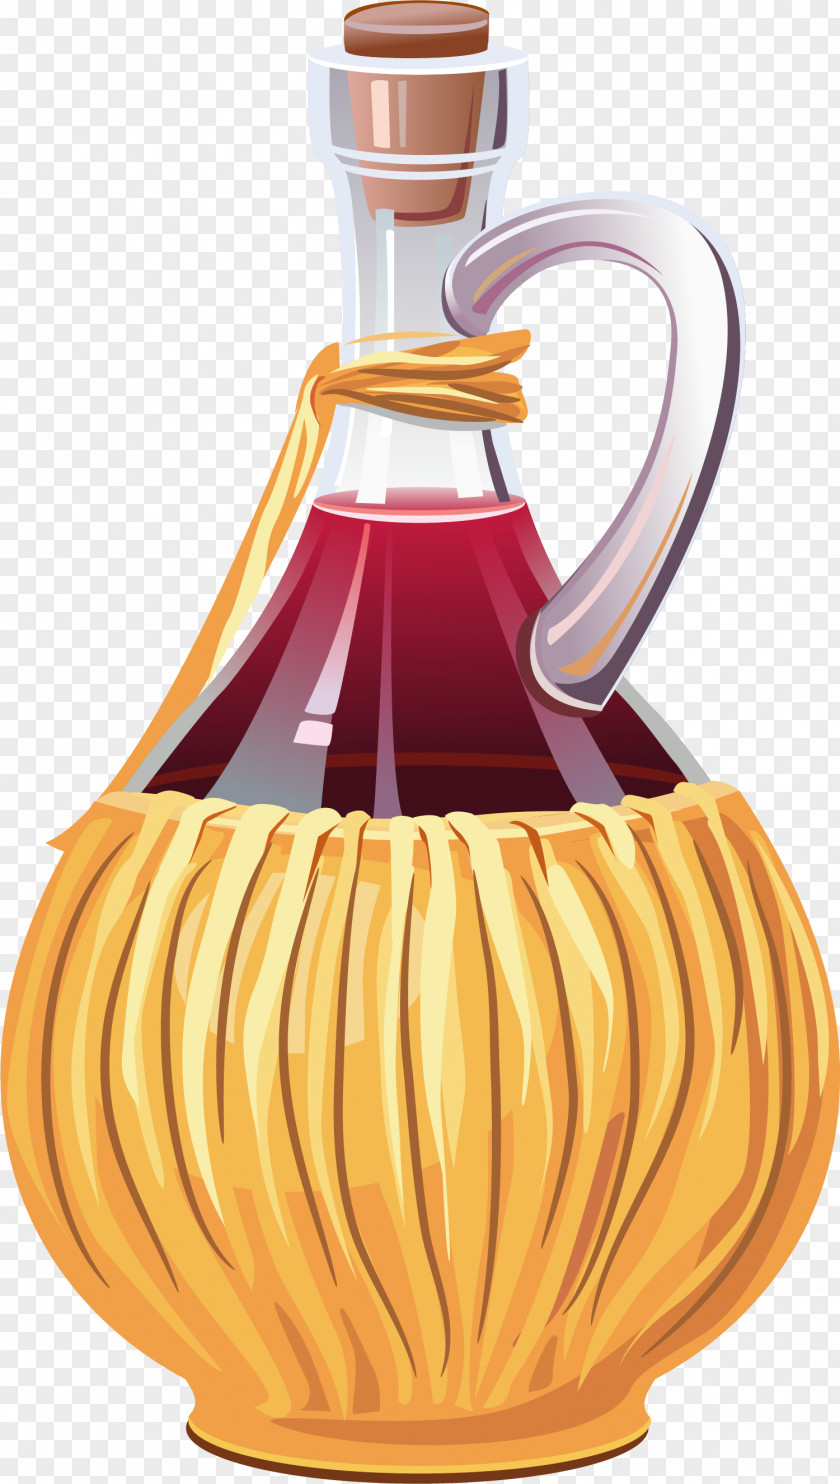 Red Concise Wine Bottle Champagne Common Grape Vine Rosxe9 PNG